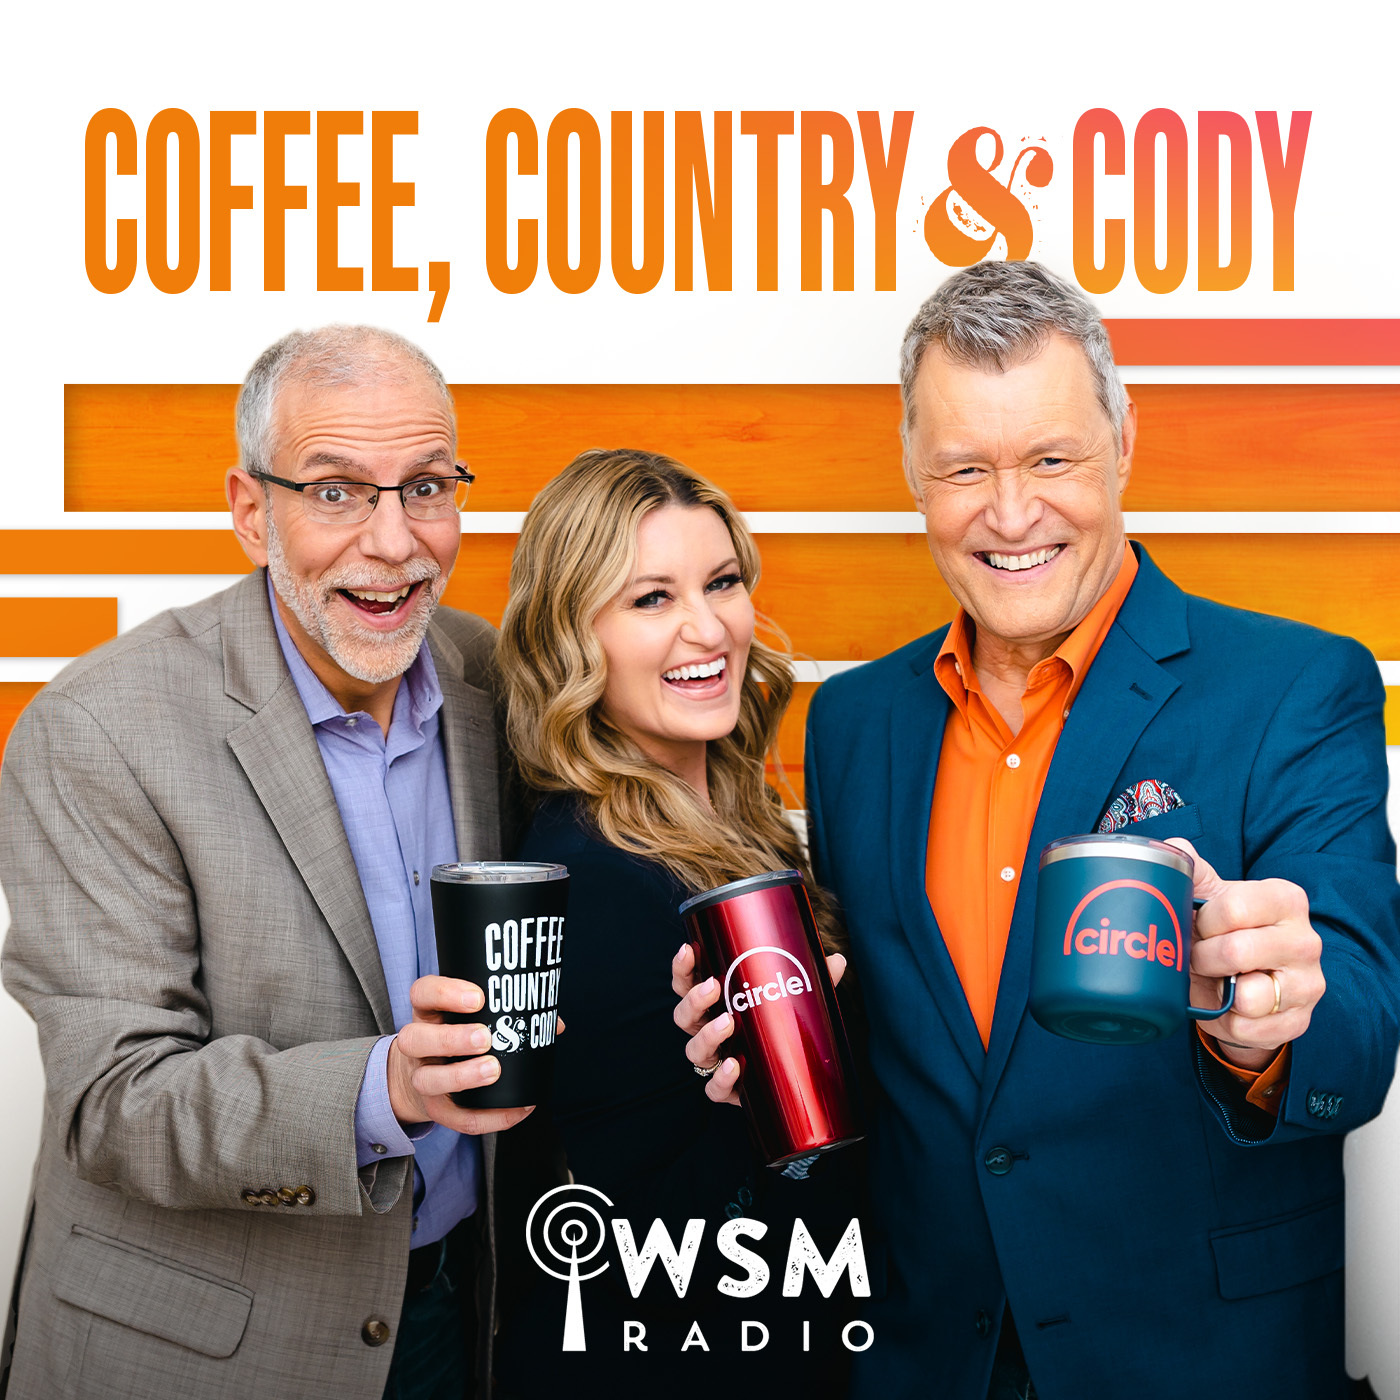 Deana Carter on Coffee, Country & Cody